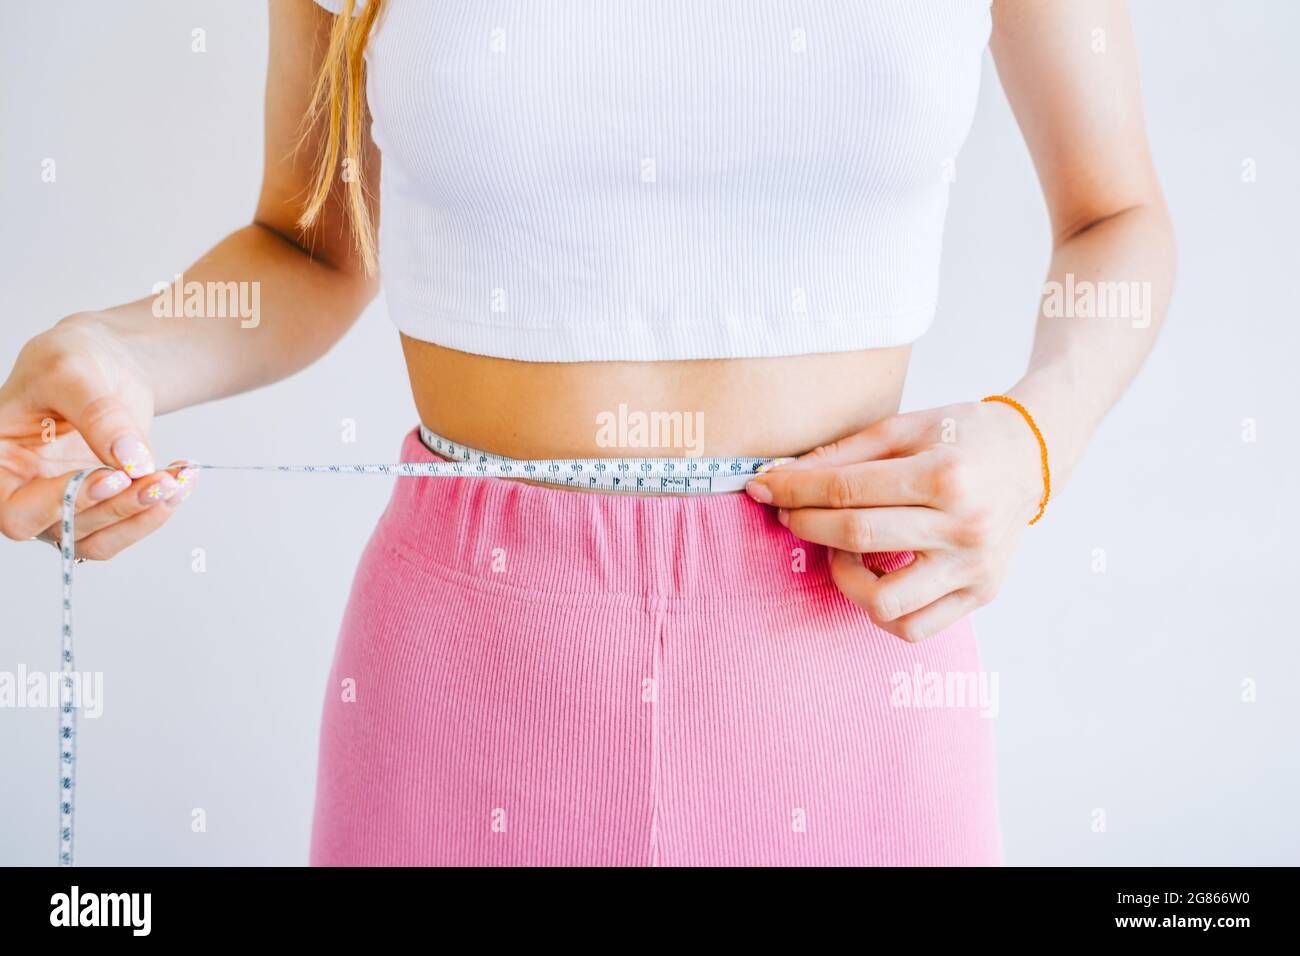 https://c8.alamy.com/comp/2G866W0/slim-woman-measuring-her-waists-size-with-tape-measure-on-white-background-successful-weight-loss-slim-fit-concept-2G866W0.jpg